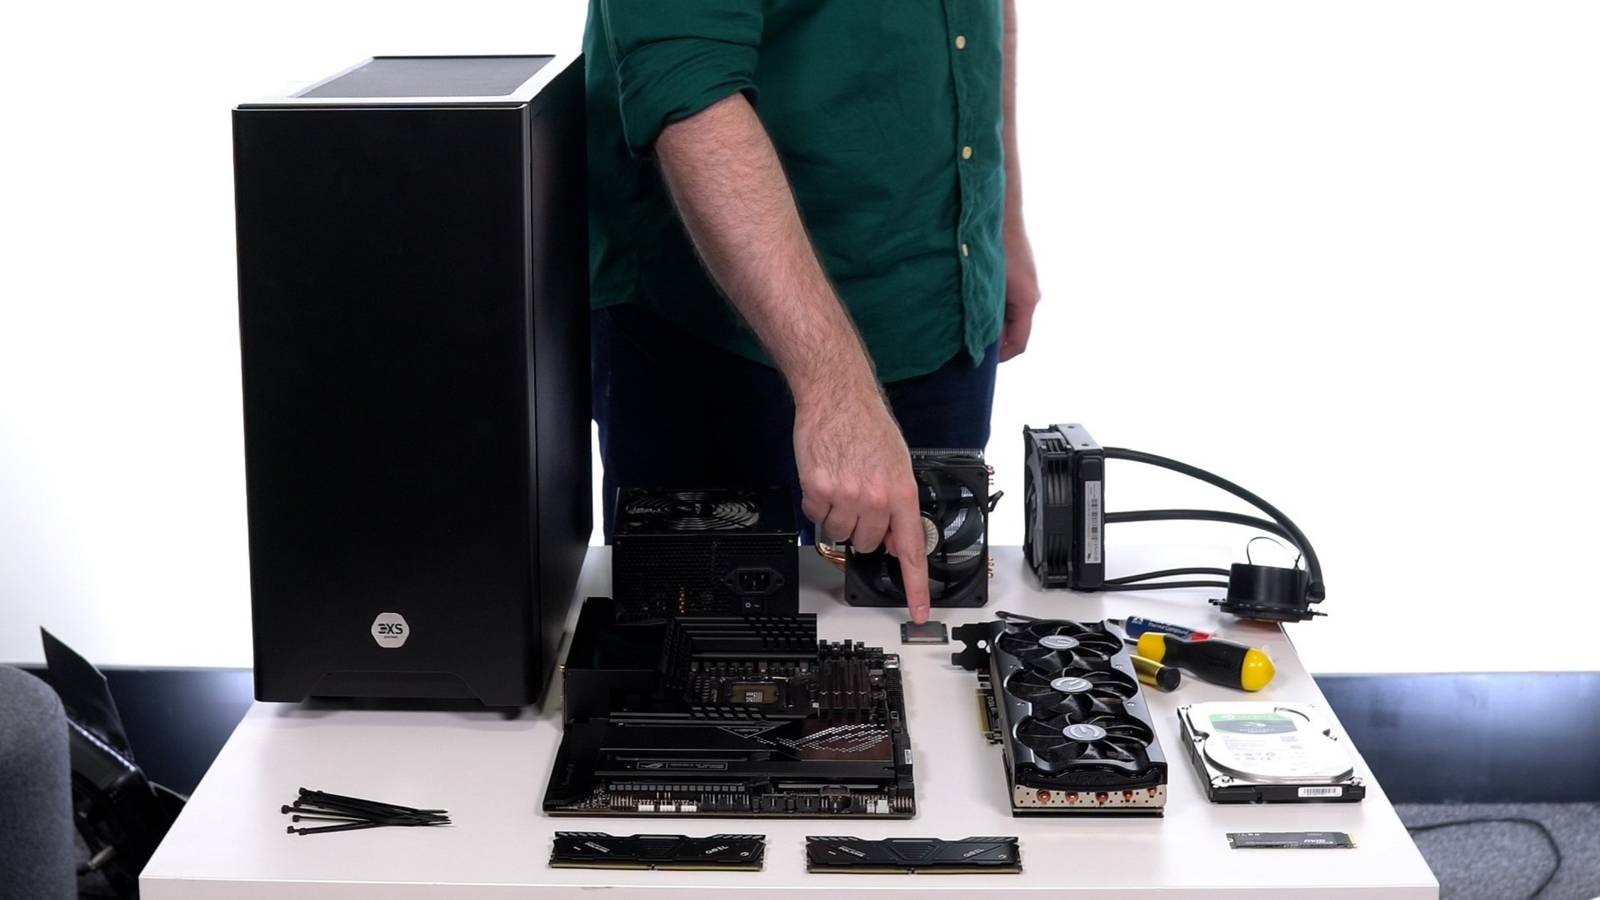 Parts Needed To Build a PC: The Complete Guide - ElectronicsHub